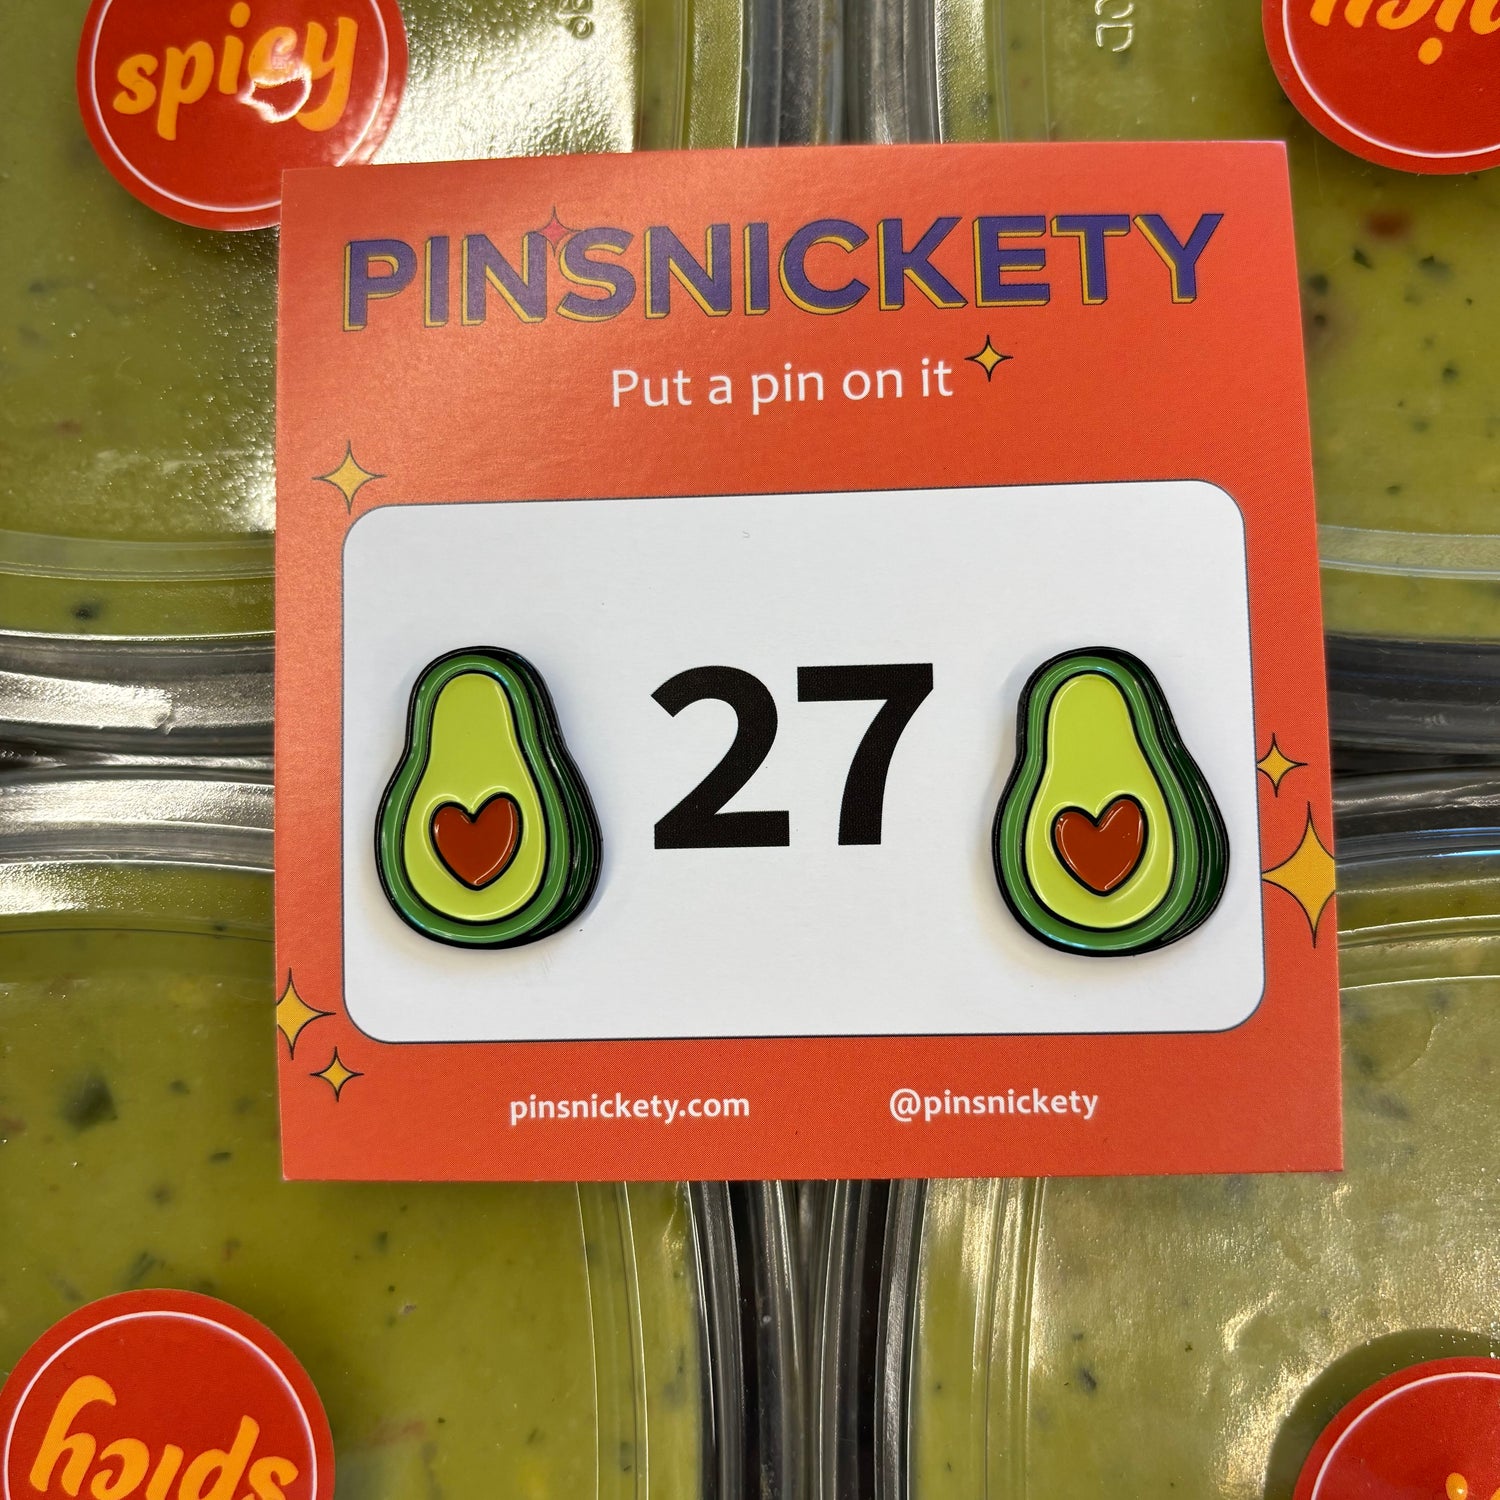 pinsnickety avocado horse show number pins on a stack of spicy guacamole containers in a store